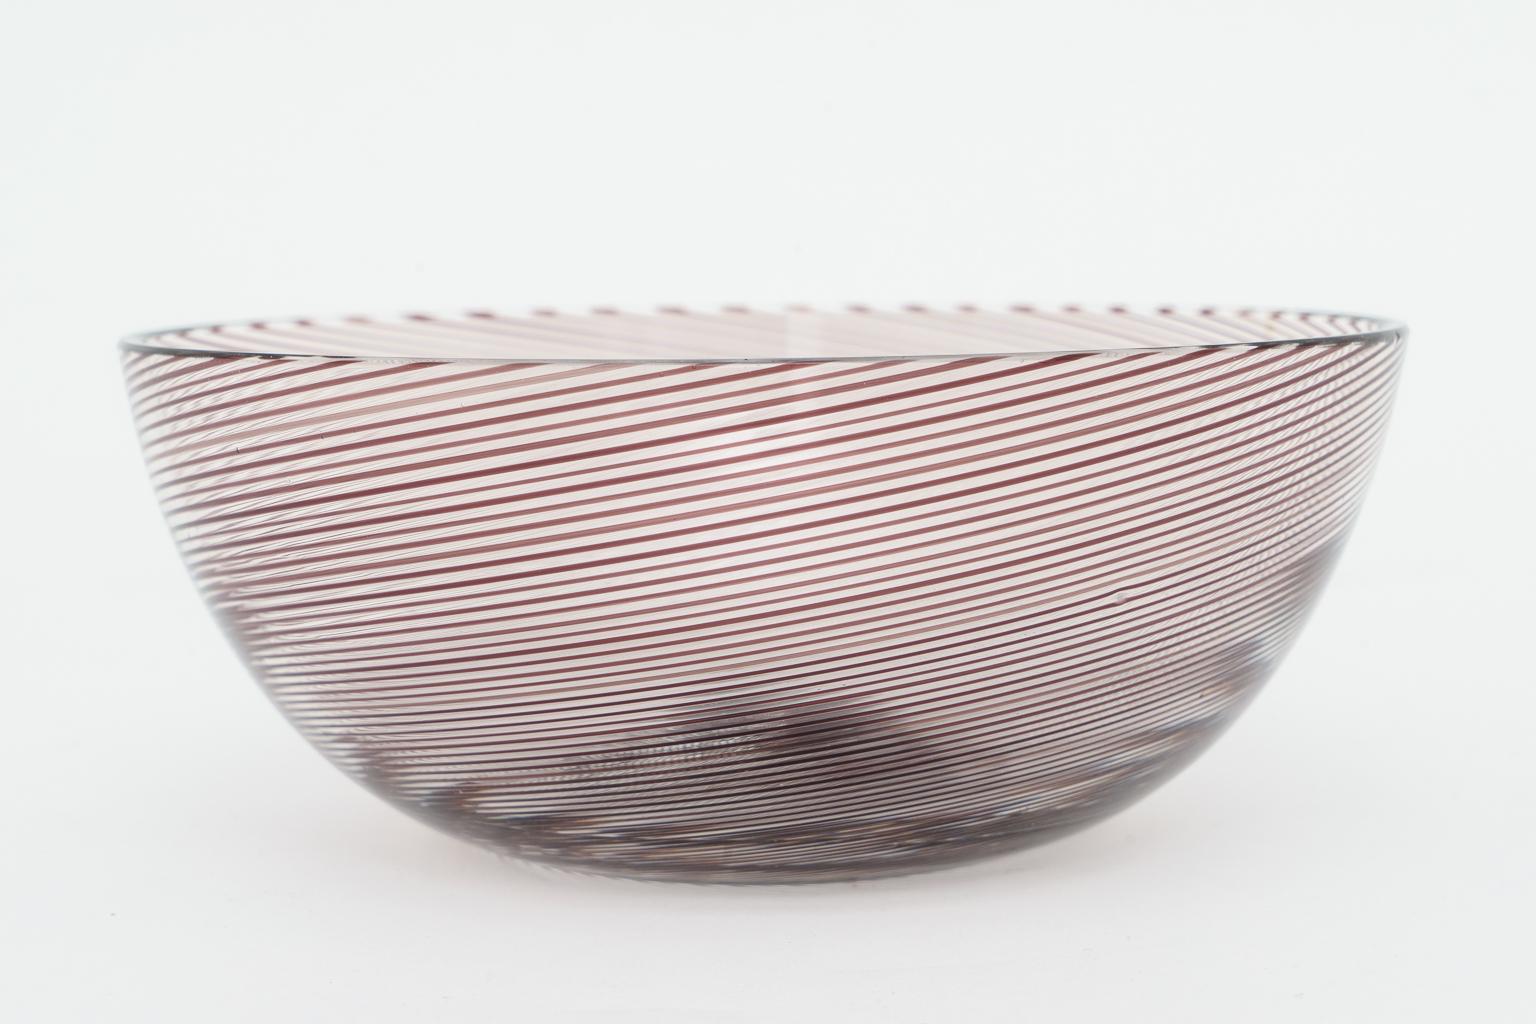 Hand-Crafted Murano Glass Bowl by Venini